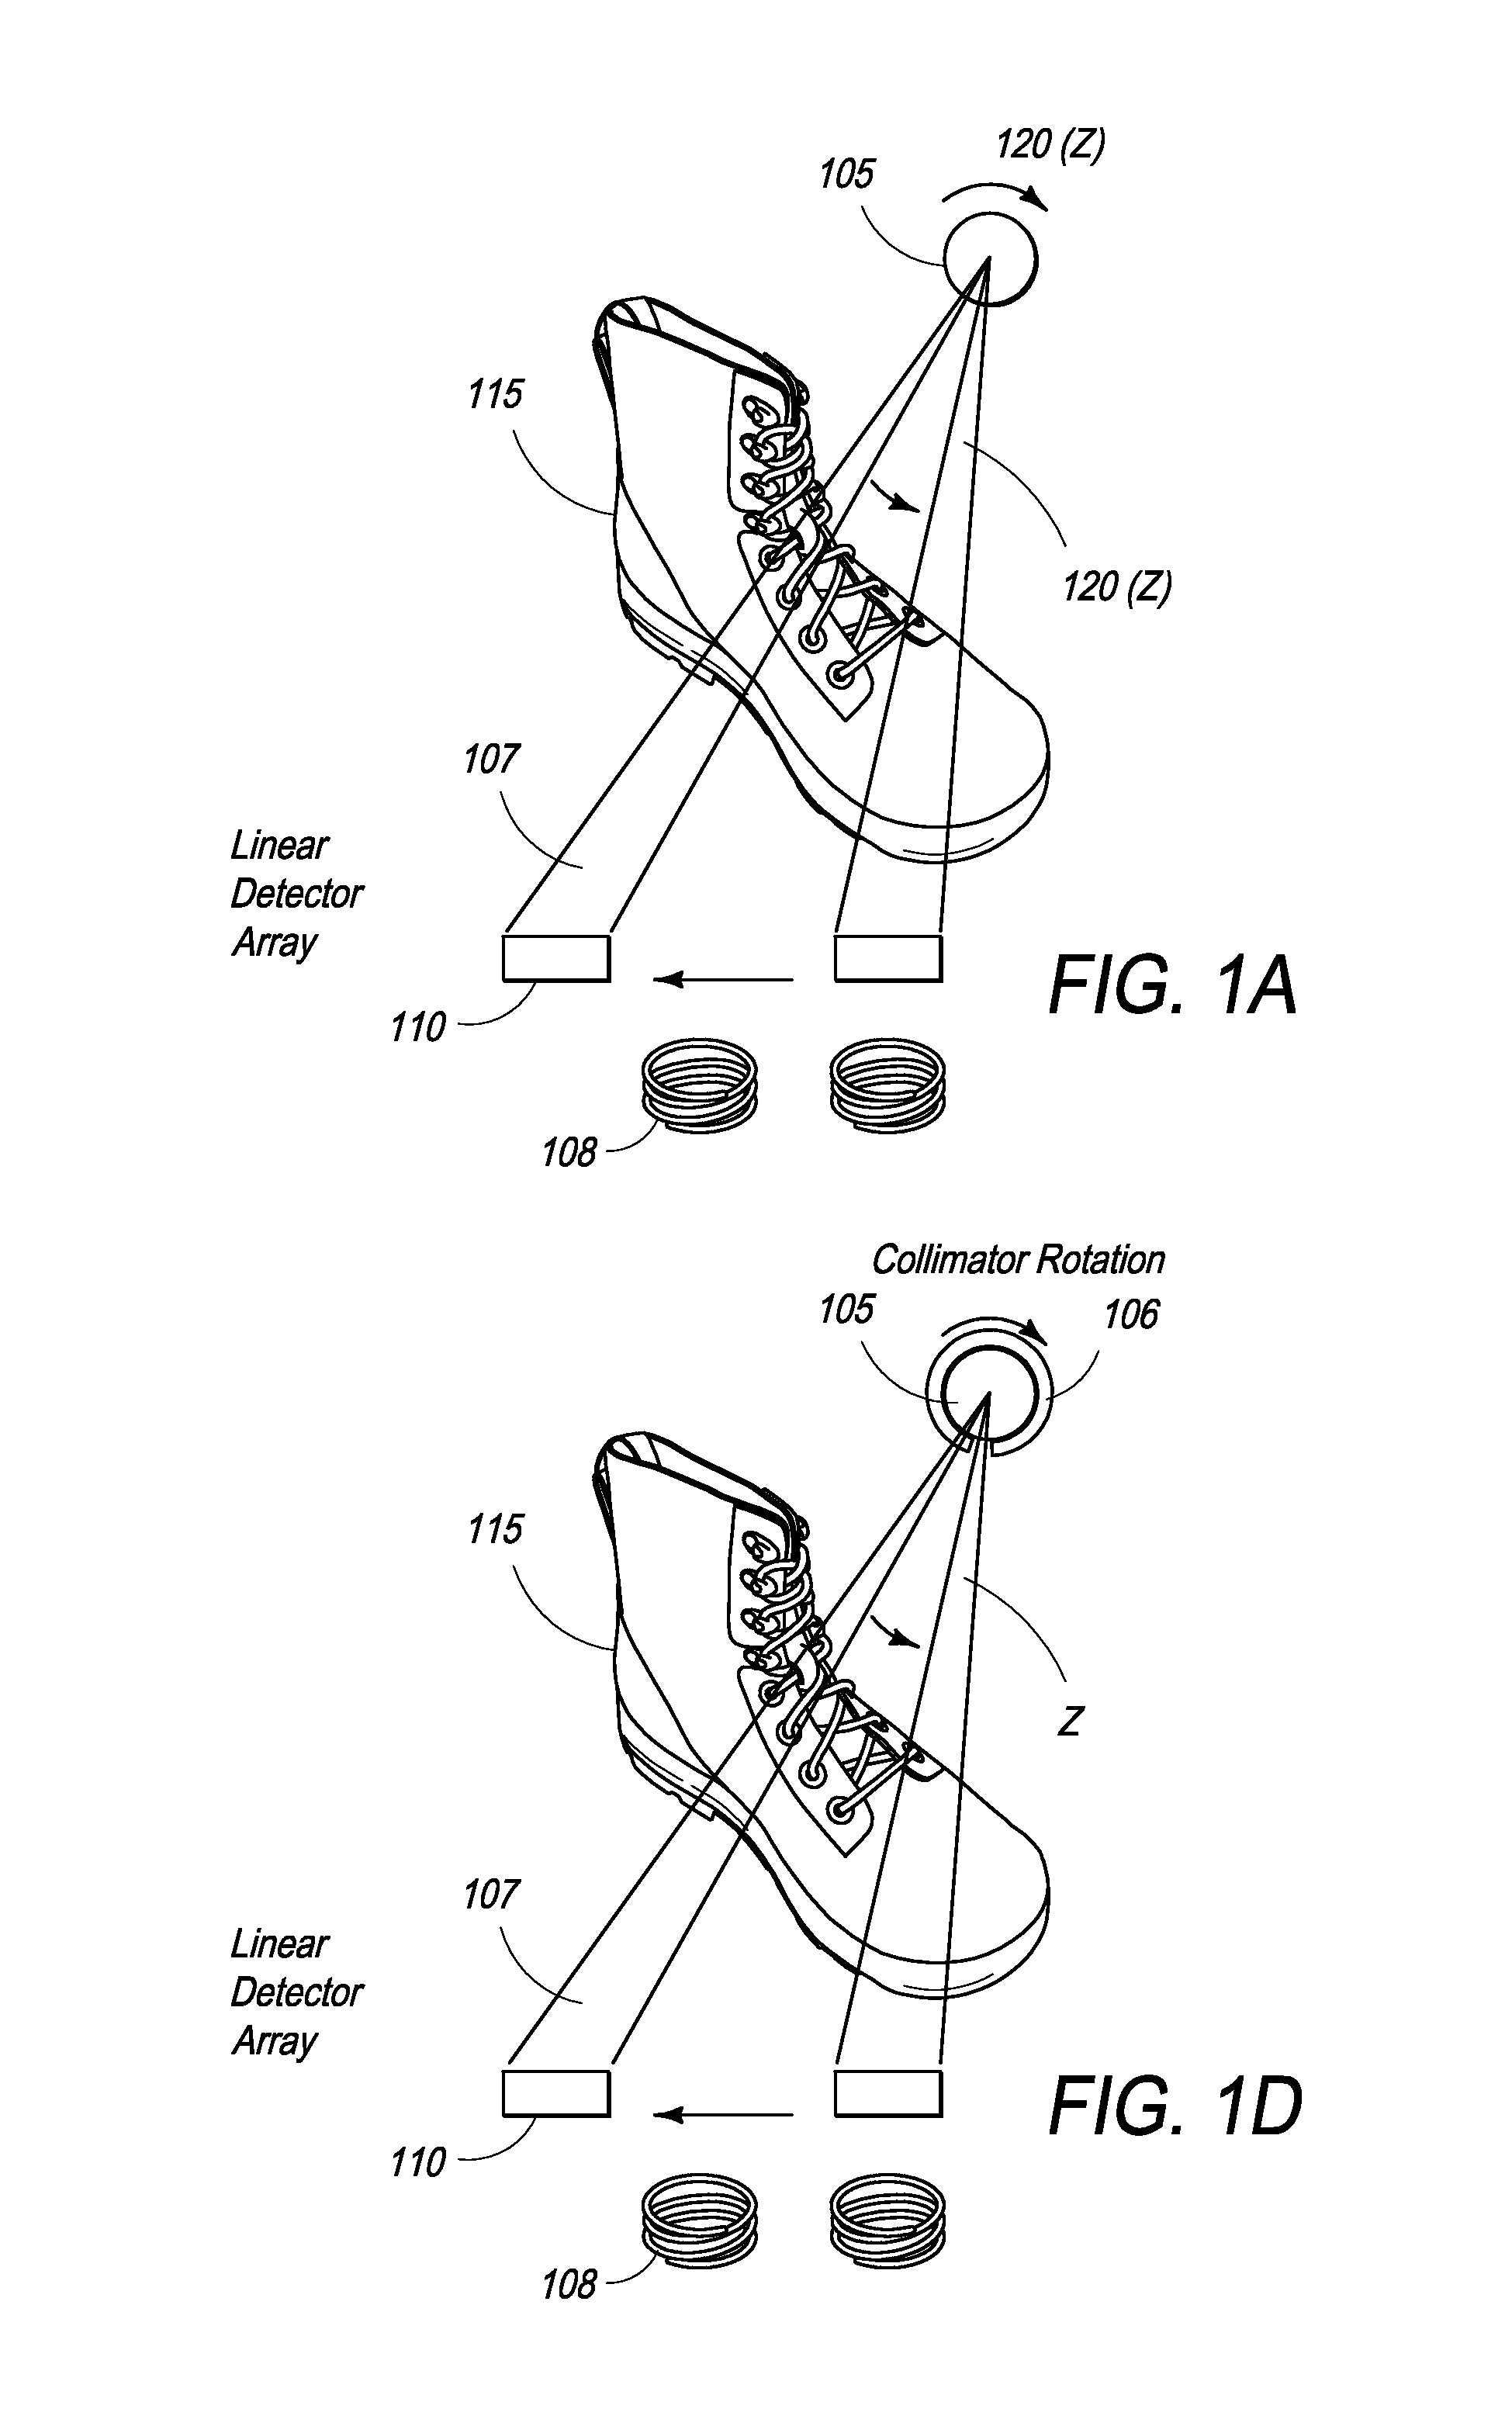 X-ray-based system and methods for inspecting a person's shoes for aviation security threats